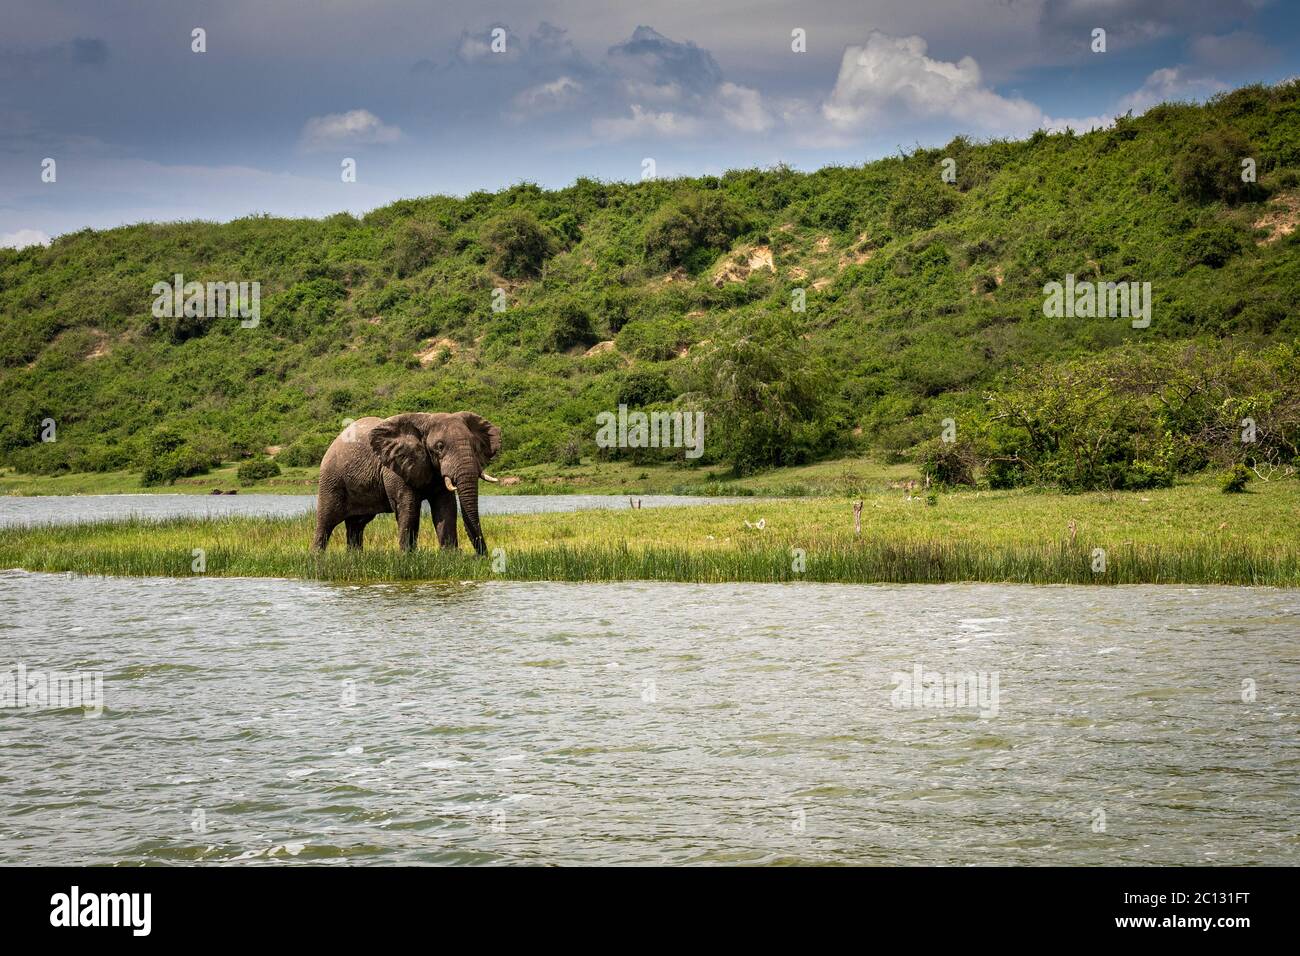 Portrait of an African bush elephant, Loxodonta africana, taken from a boat trip on the Kazinga Channel, Queen Elizabeth National Park, Uganda, Africa Stock Photo